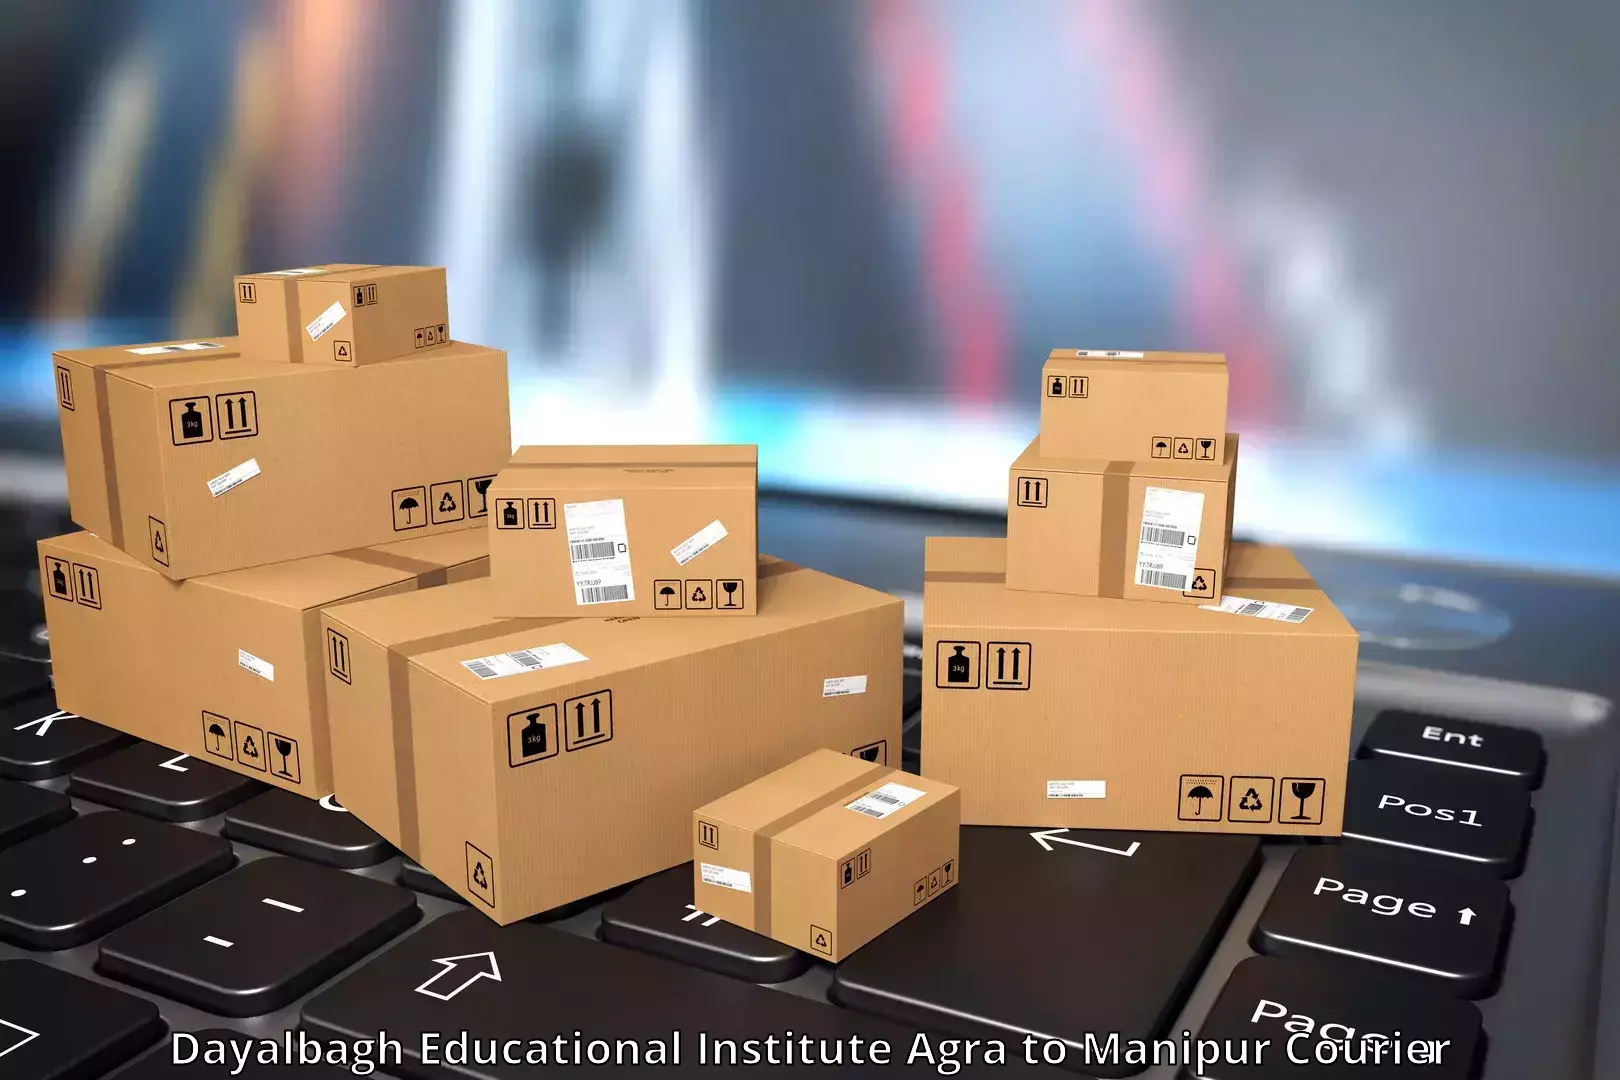 Bulk courier orders Dayalbagh Educational Institute Agra to Ukhrul